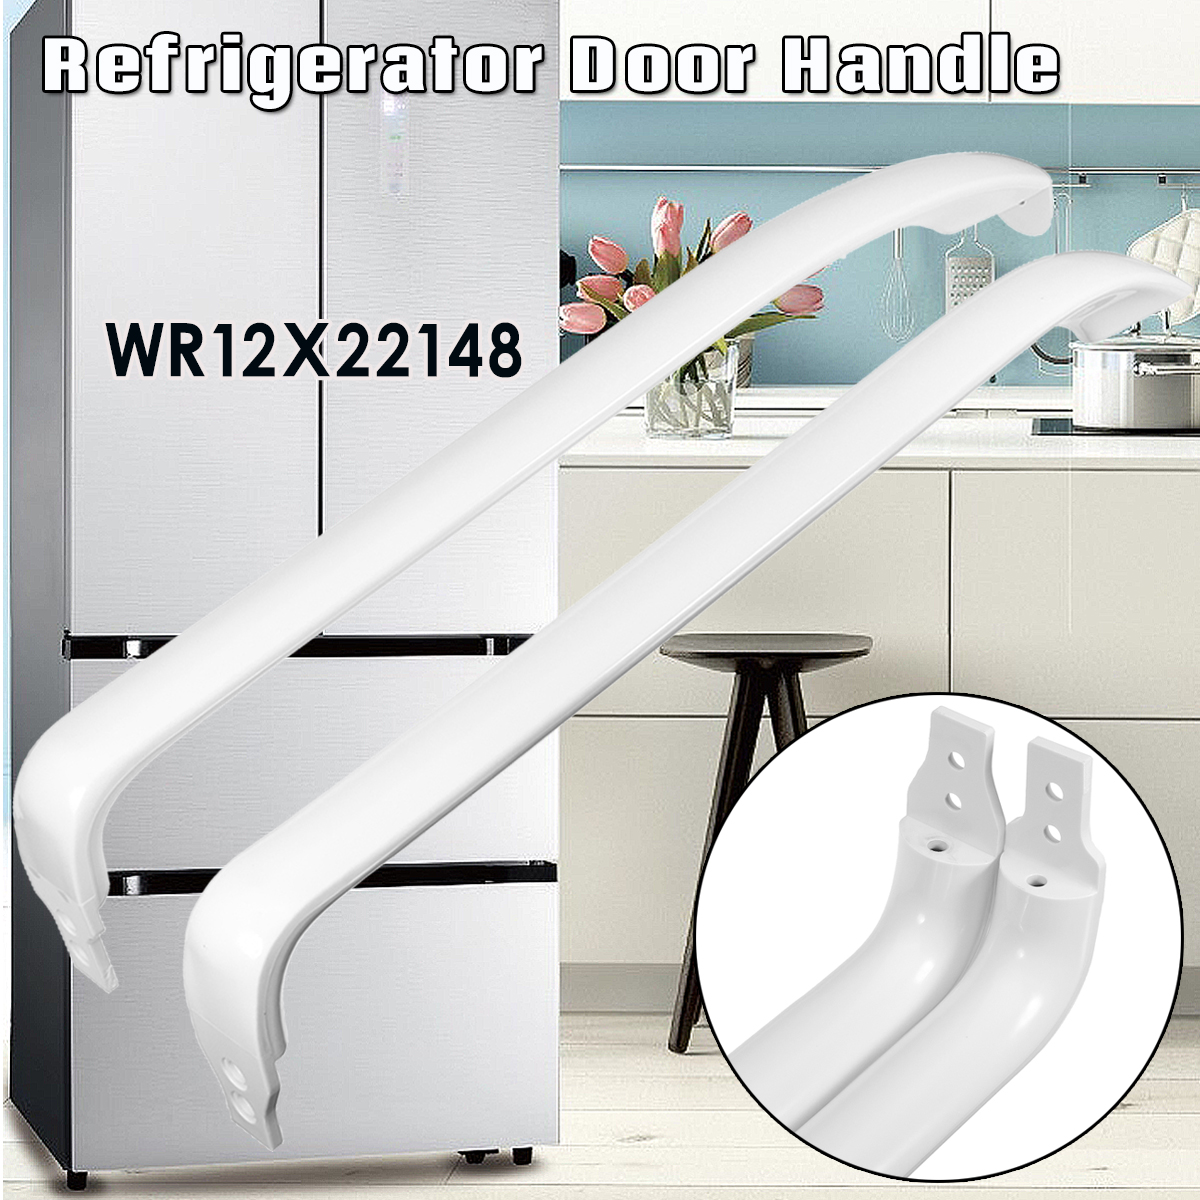 Refrigerator-Door-Handles-For-General-Electric-GE-WR12X22148-WR12X11011-1345234-1